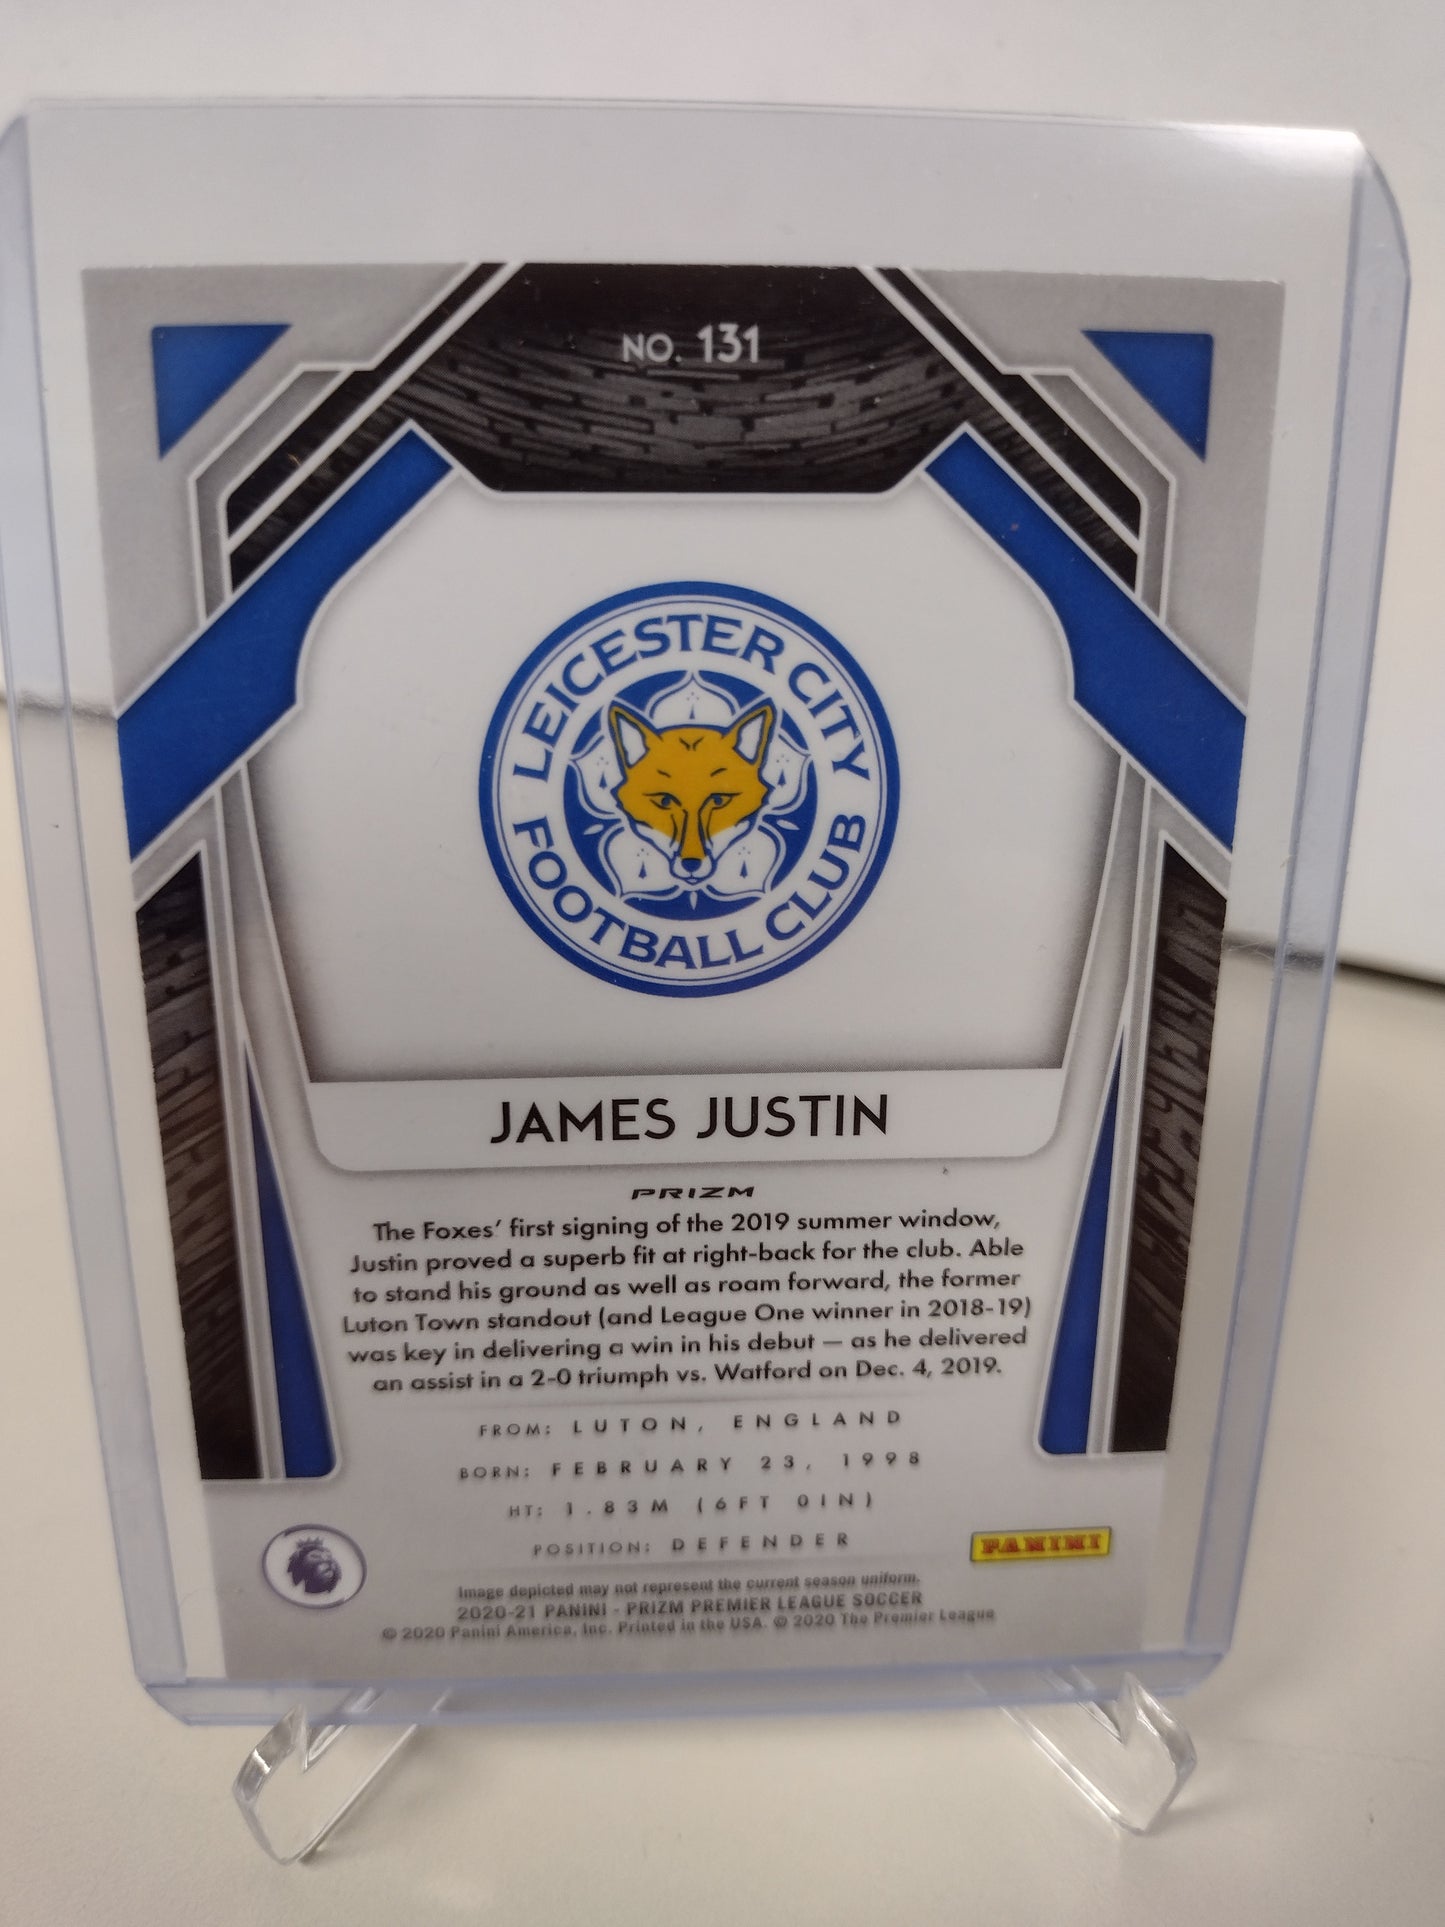 James Justin Rookie Leicester City Panini Prizm Premier League 20/21 Red Pulsar